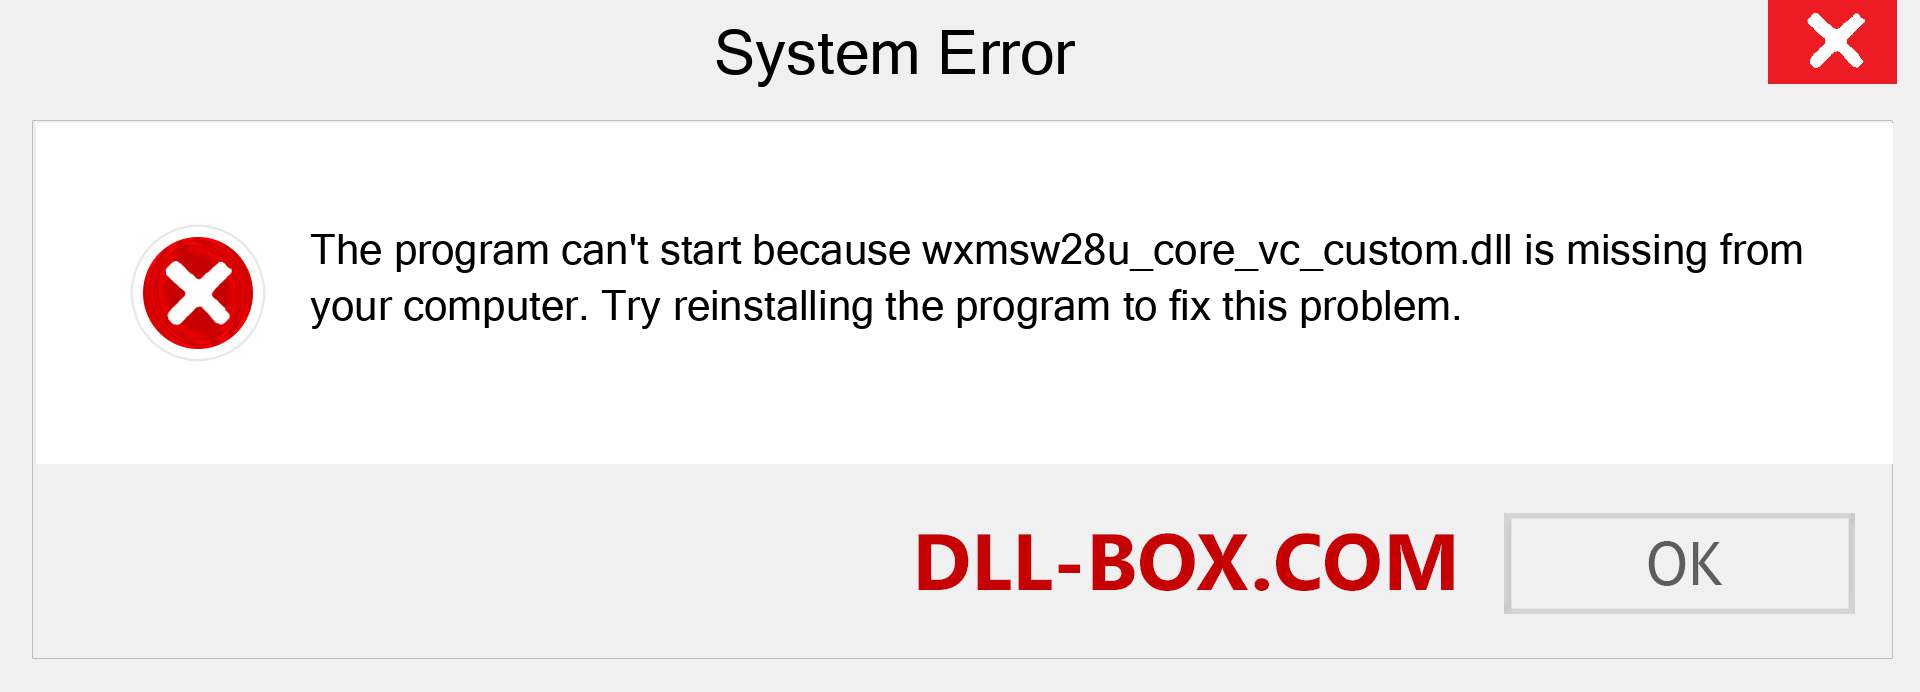  wxmsw28u_core_vc_custom.dll file is missing?. Download for Windows 7, 8, 10 - Fix  wxmsw28u_core_vc_custom dll Missing Error on Windows, photos, images